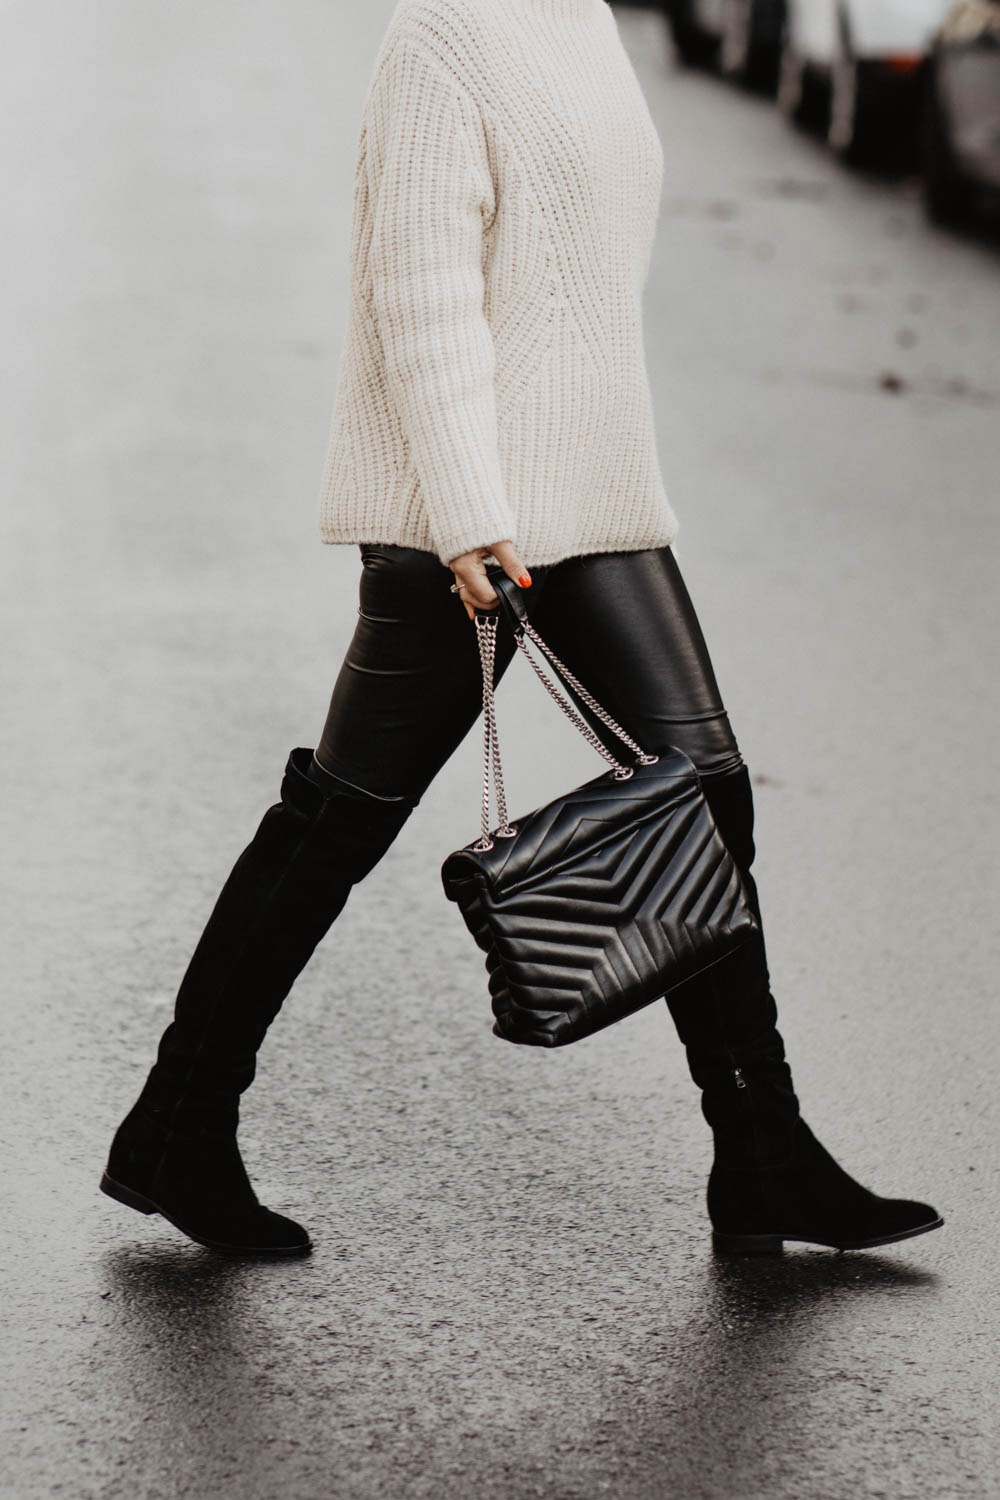 OUTFIT: Over the knee, over the moon! Overknee Boots - You rock my life